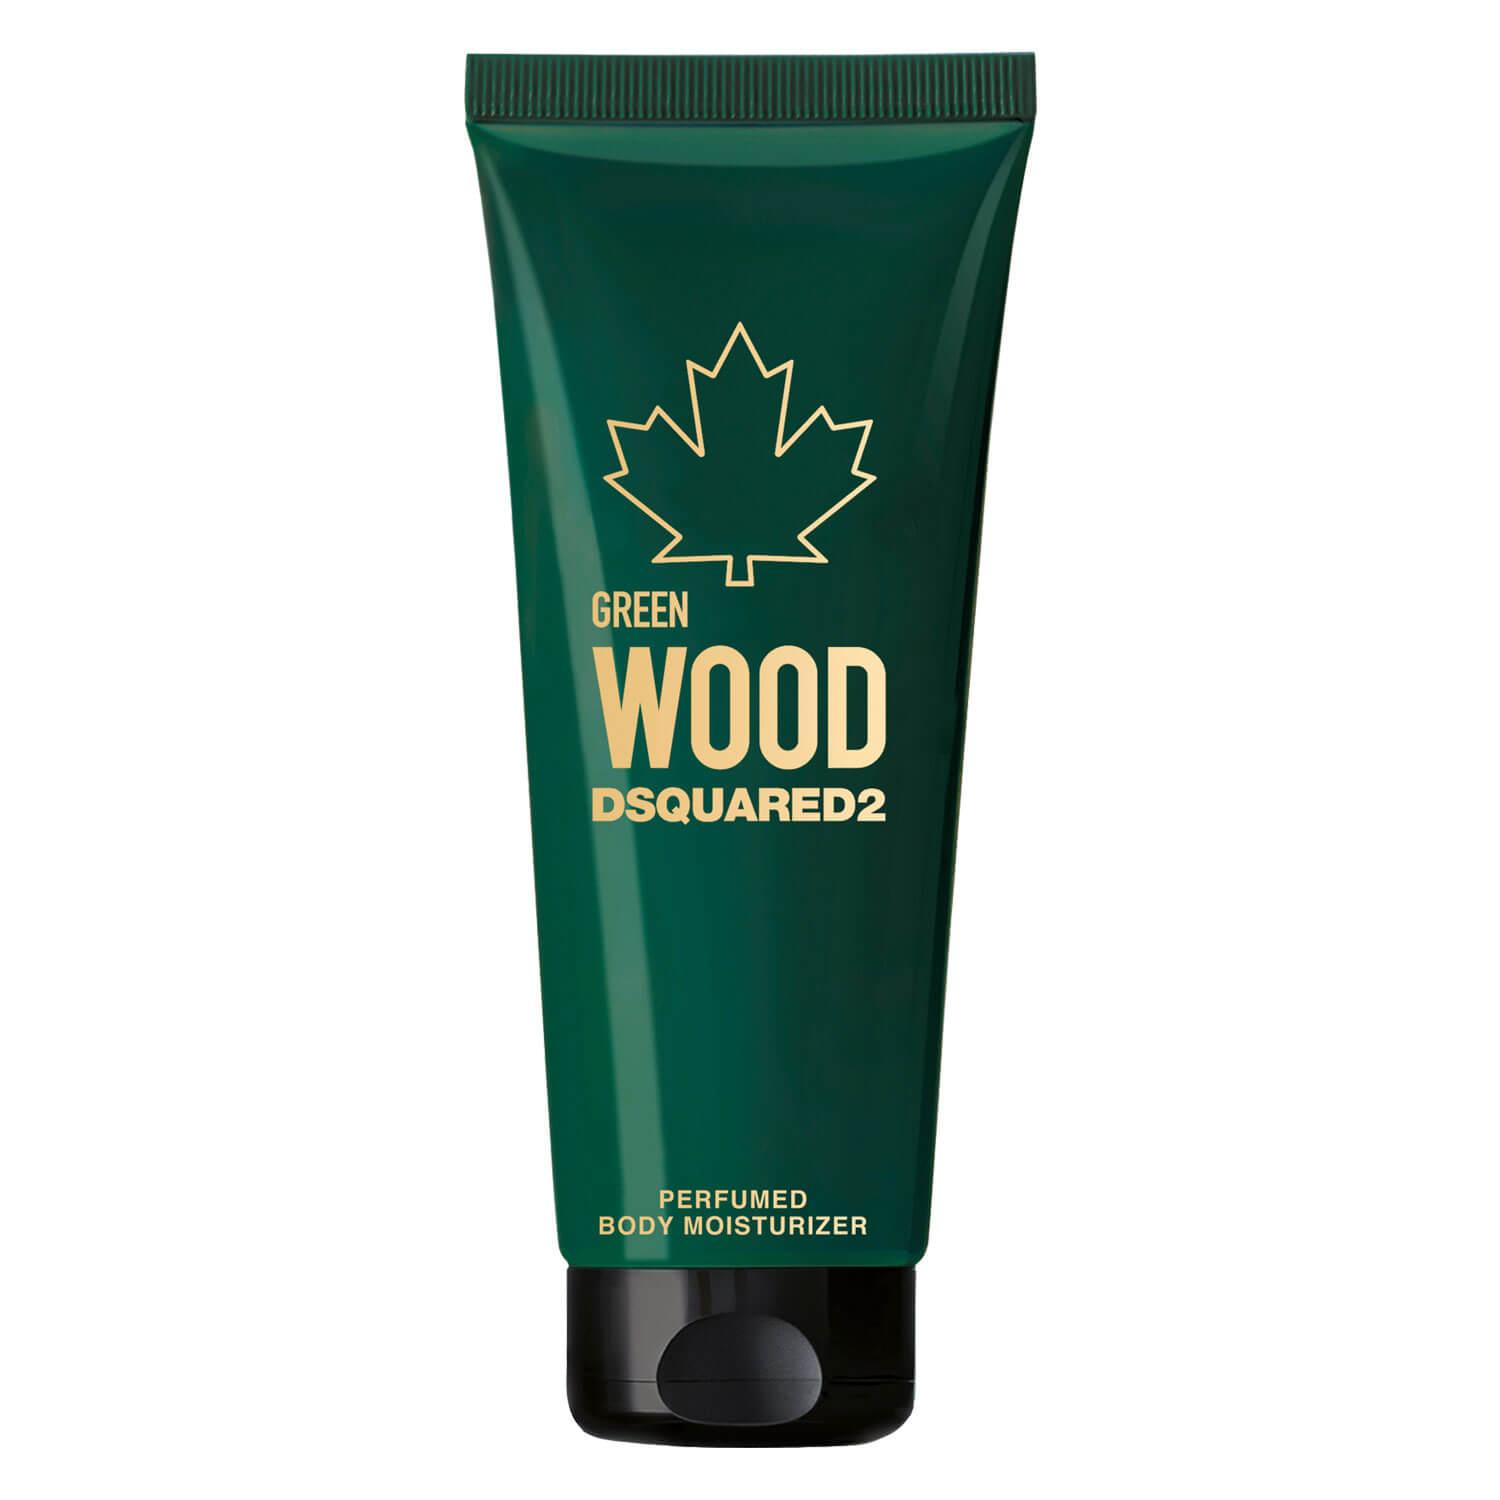 DSQUARED2 WOOD - Green Pour Homme Body Moisturizer